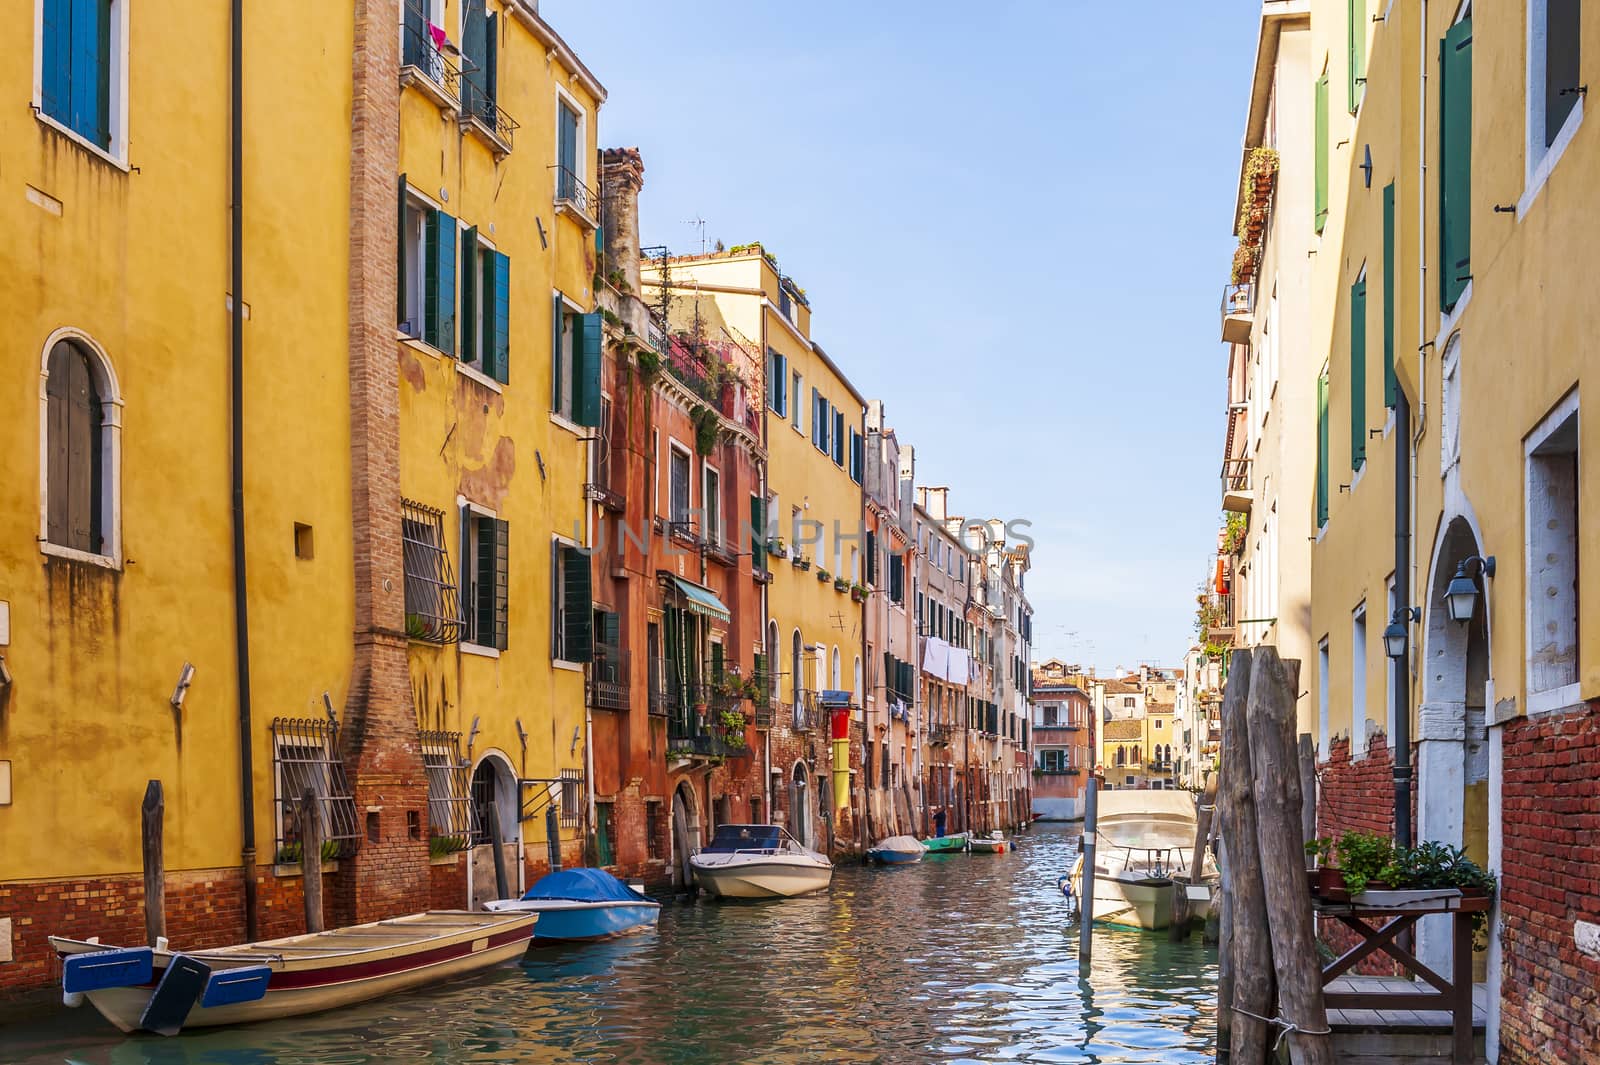 Typical facades along the canals in Venice in Veneto in the north-east of Italy.